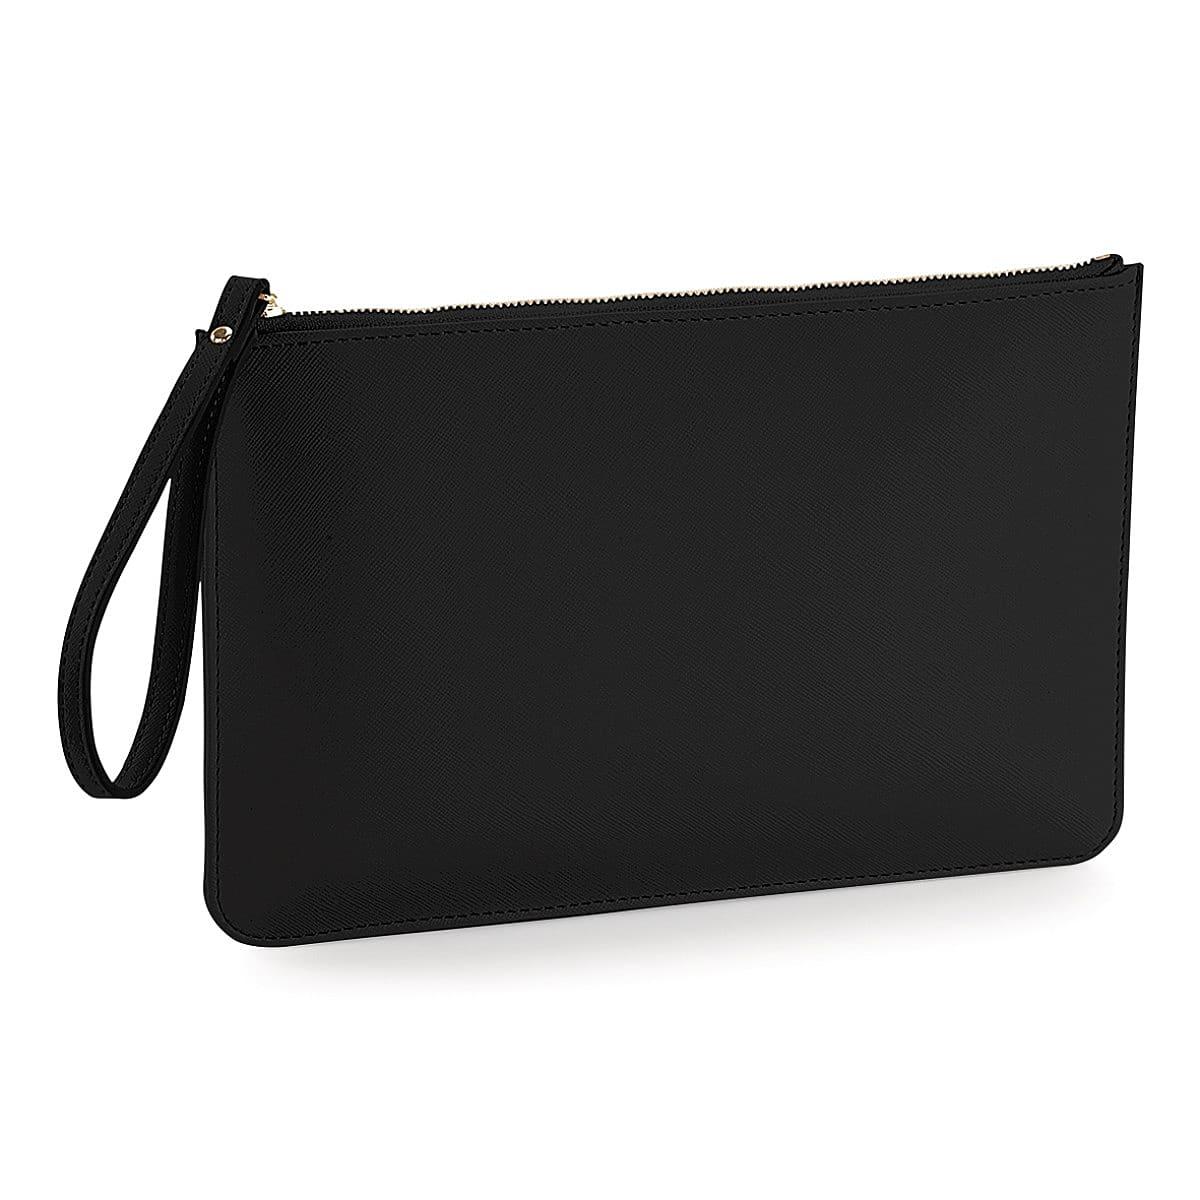 Bagbase Boutique Accessory Pouch in Black (Product Code: BG750)